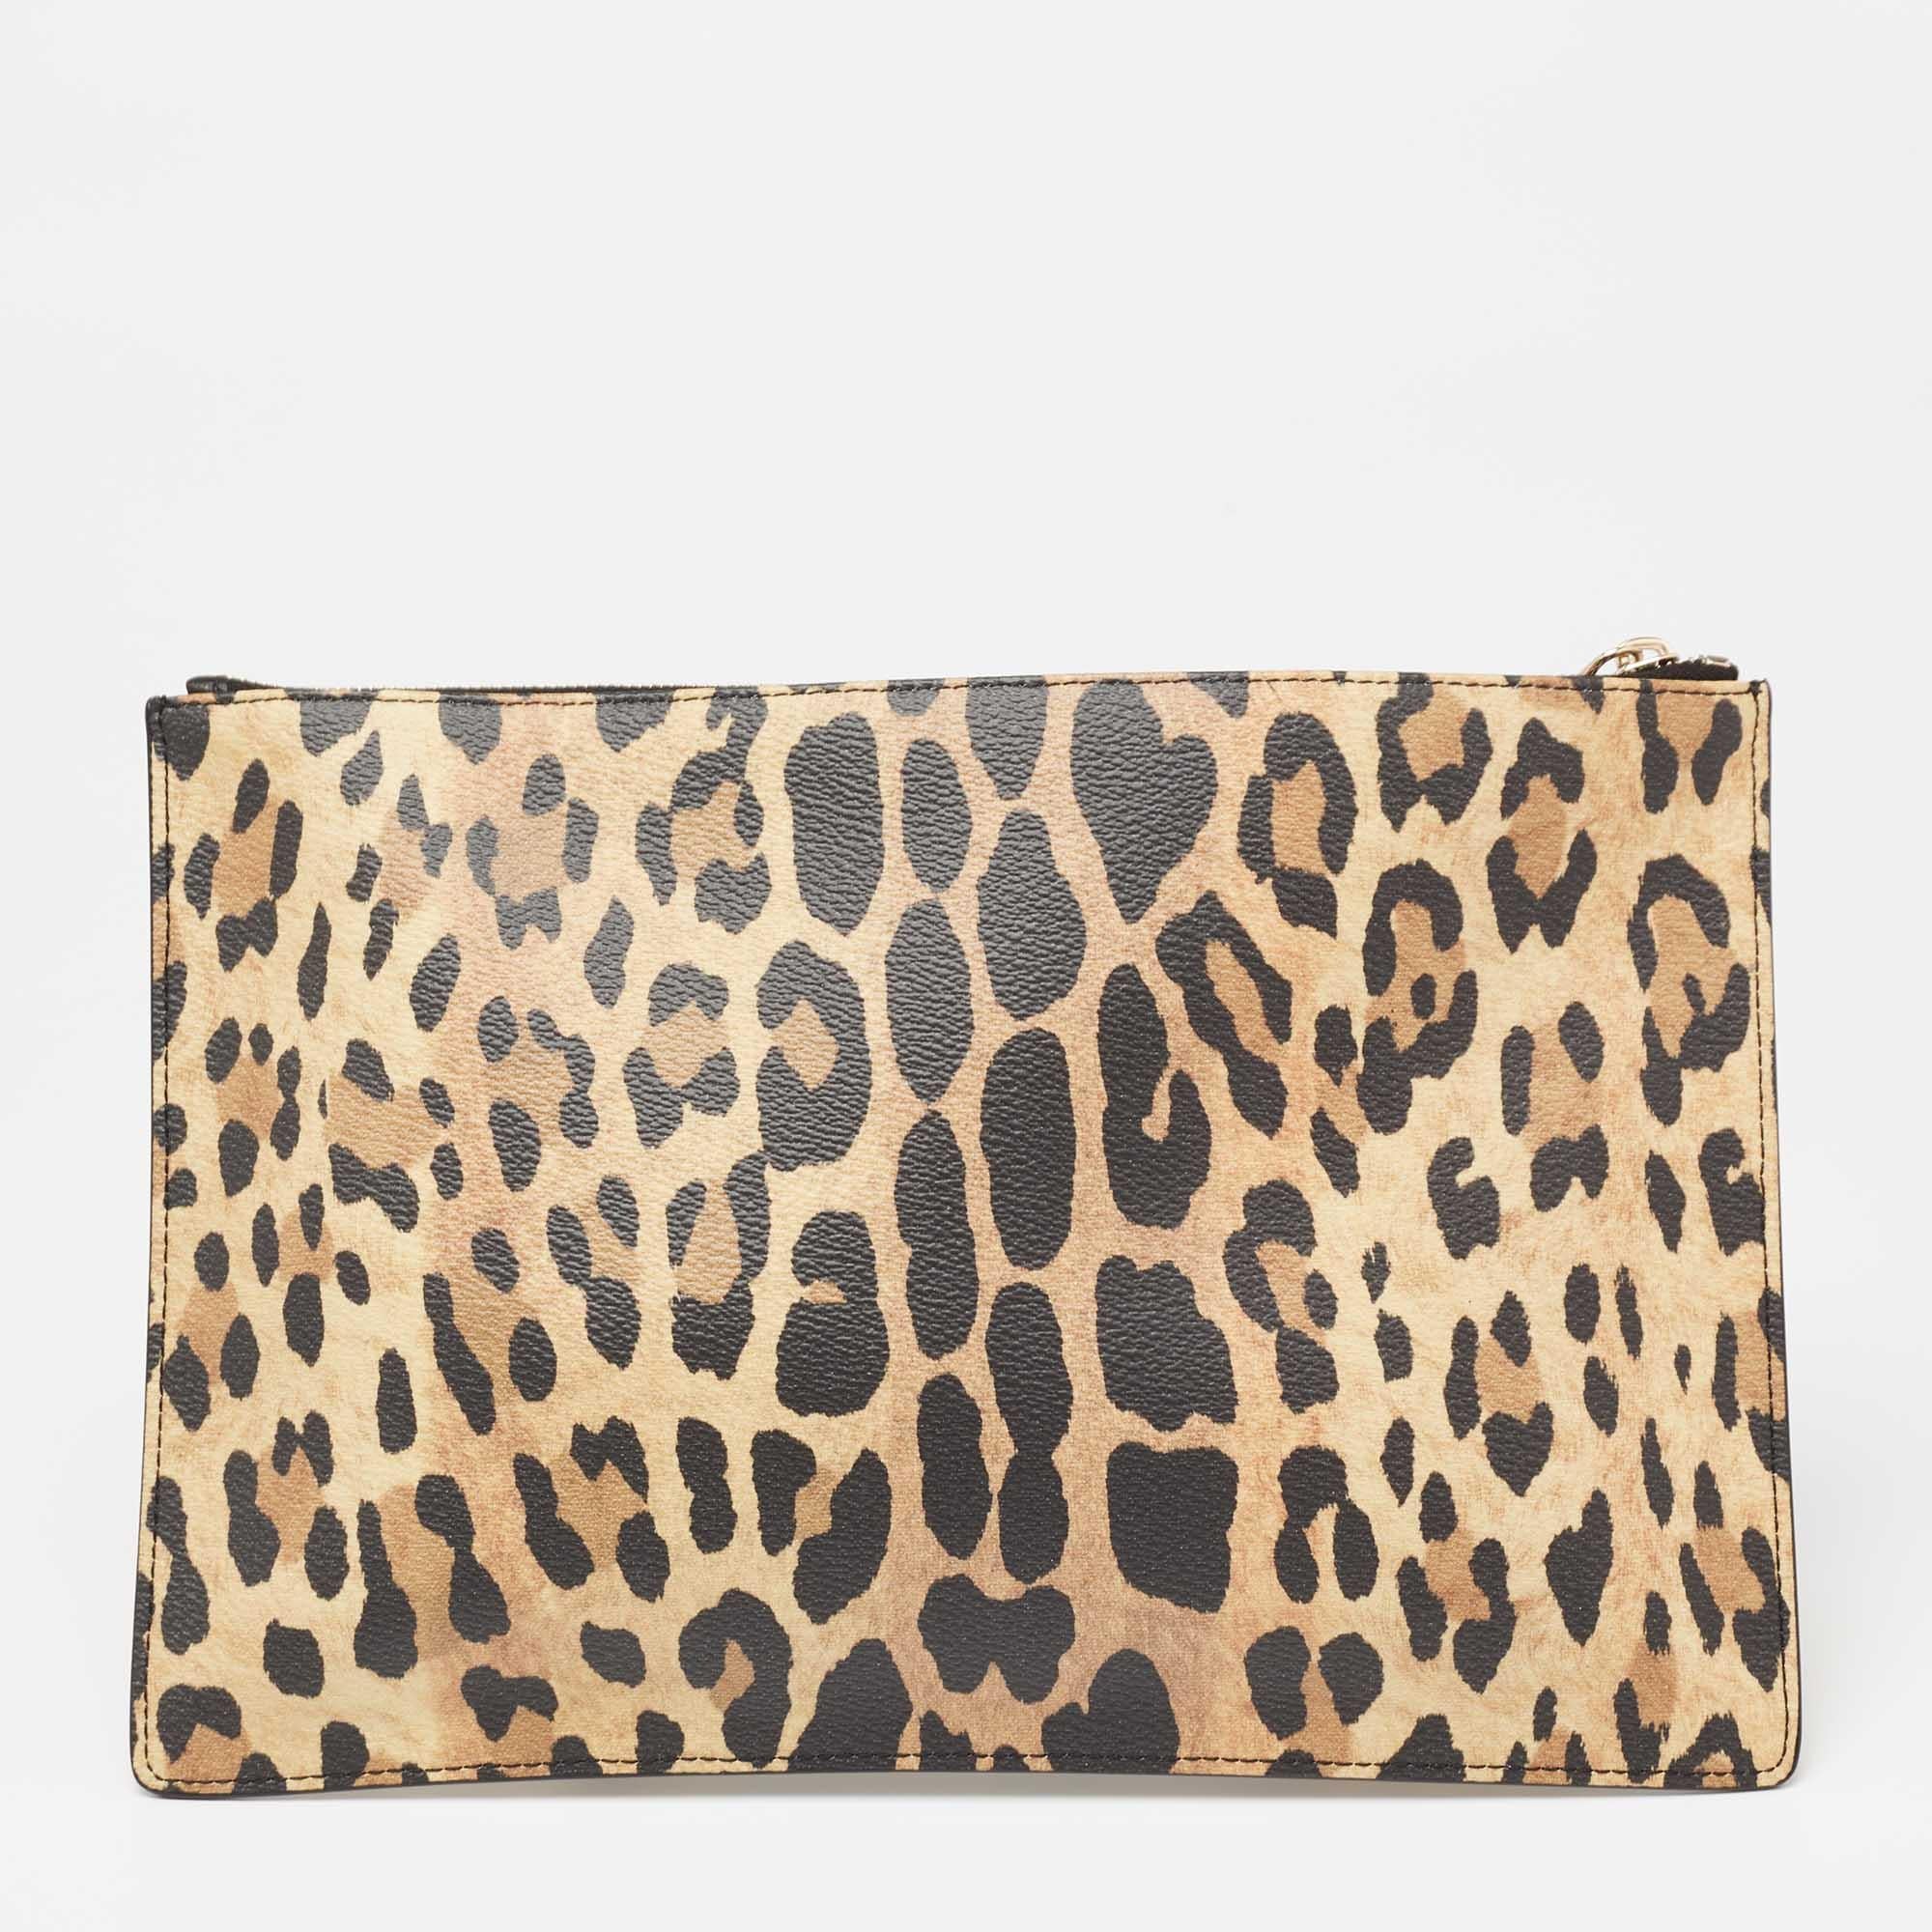 Organize your essentials in style with this Givenchy creation. The zip clutch has a leopard-print coated canvas outer and a zipper on top to secure the fabric interior.

Includes: Info Booklet, Original Dust Cloth, Original Box
